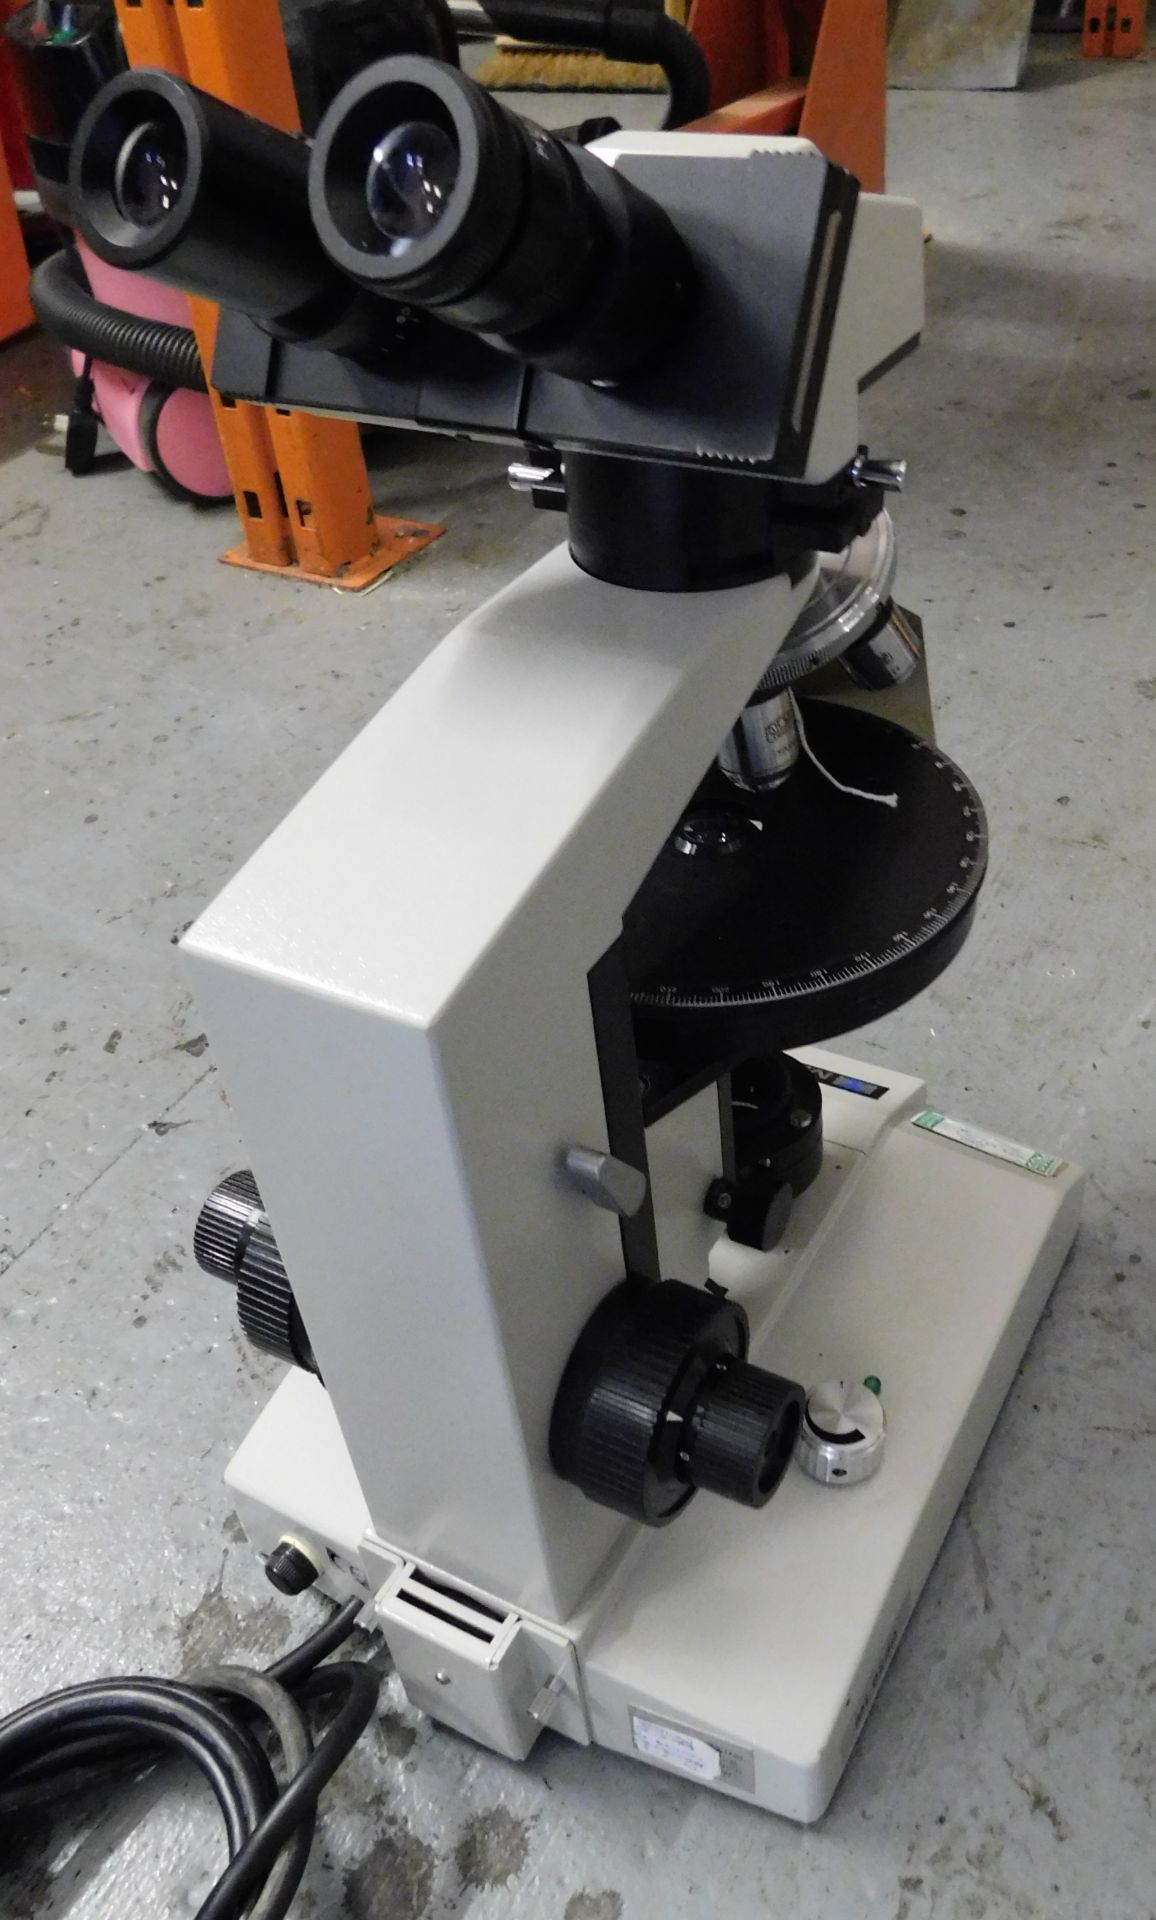 Meiji ML9200 Microscope, Serial Number 903715 (Location: Stockport. Please Refer to General Notes) - Image 3 of 6